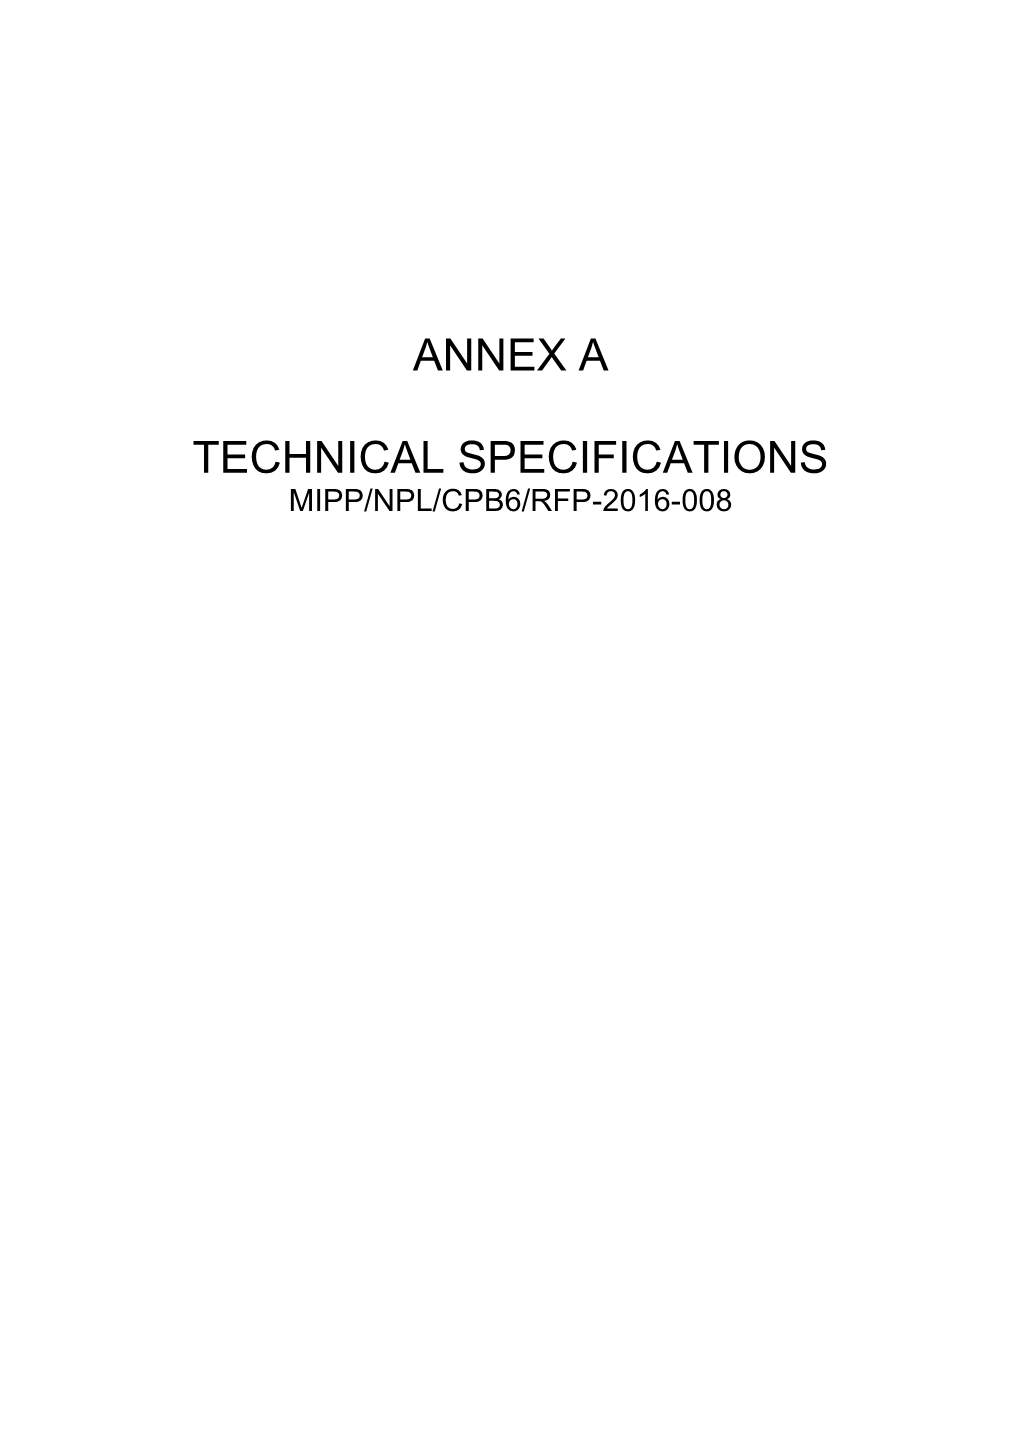 Annex a Technical Specifications